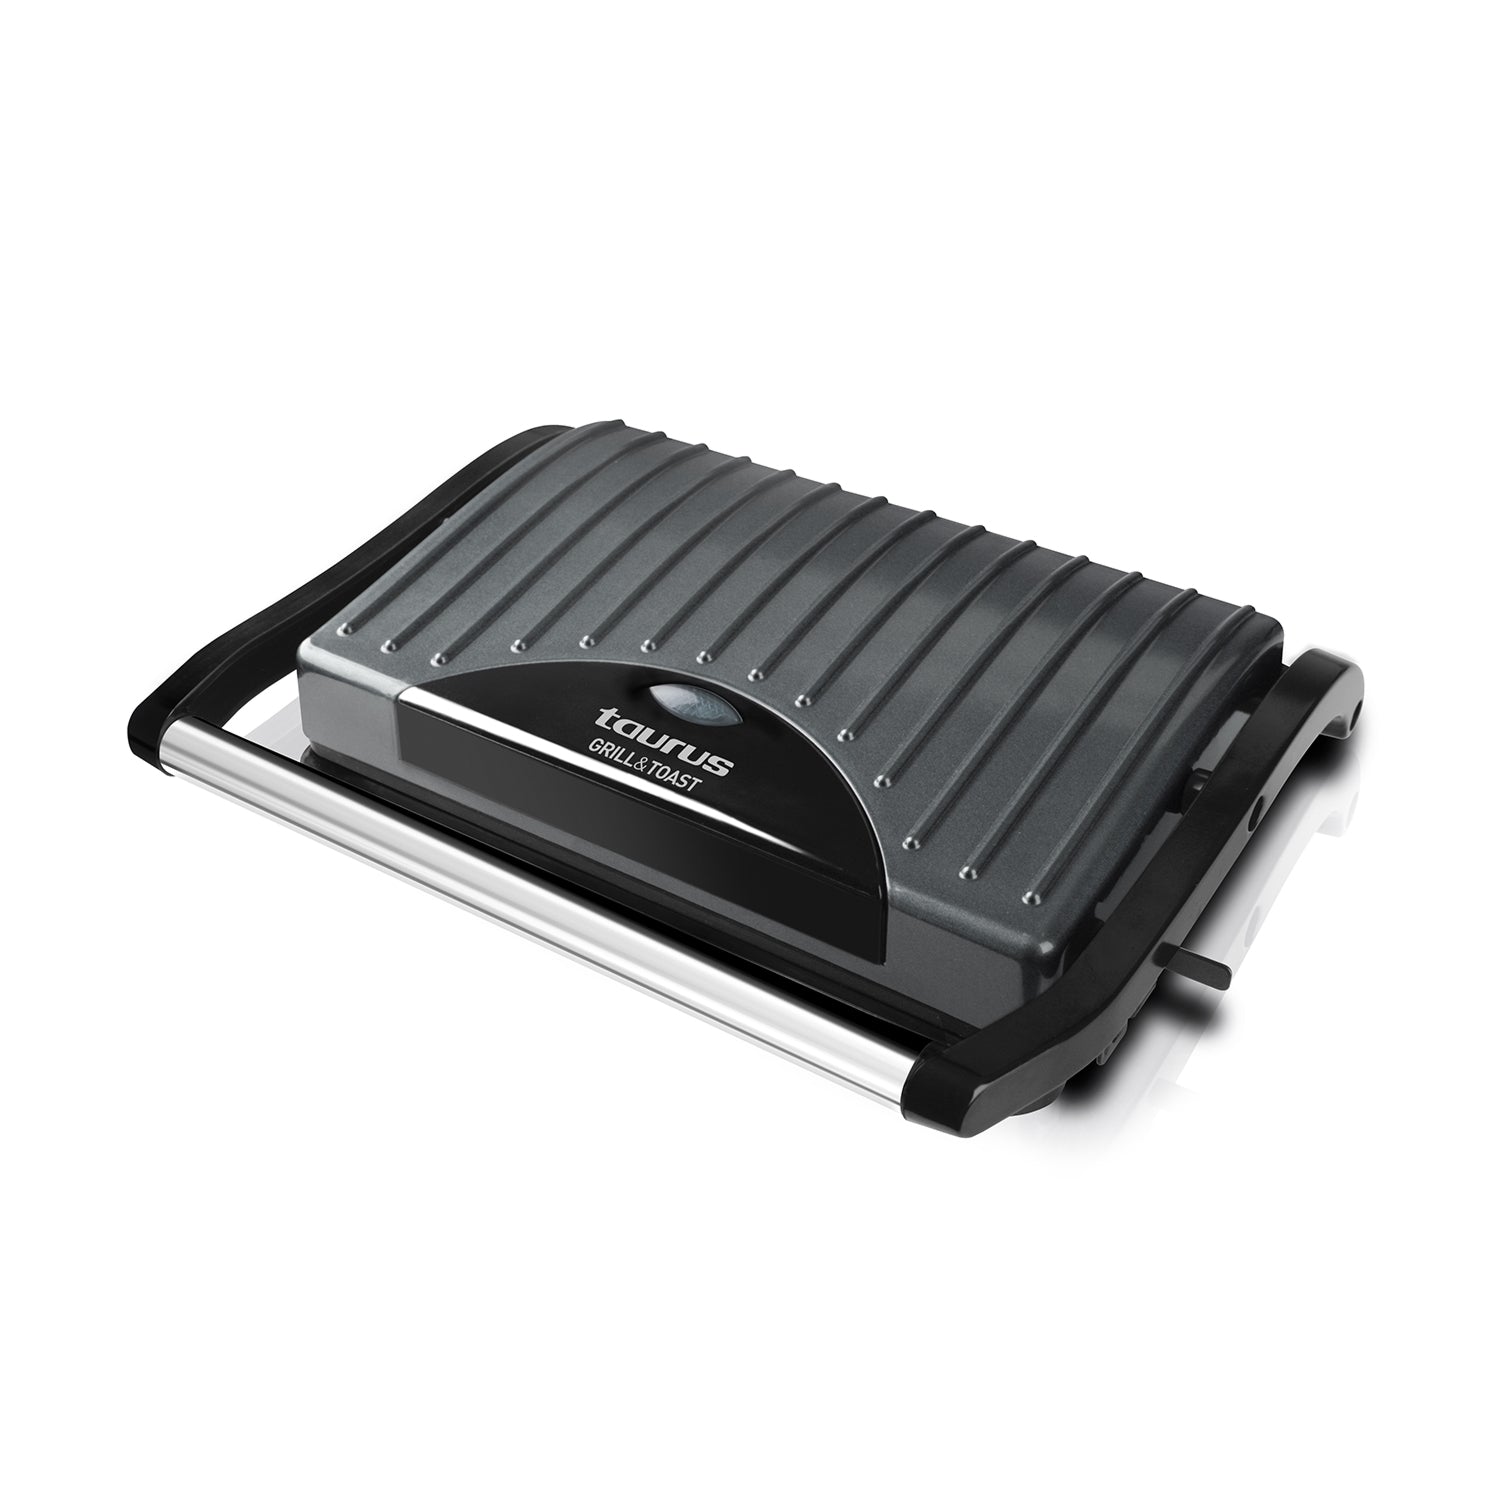 Taurus Grill Expansive desde 45,00 €